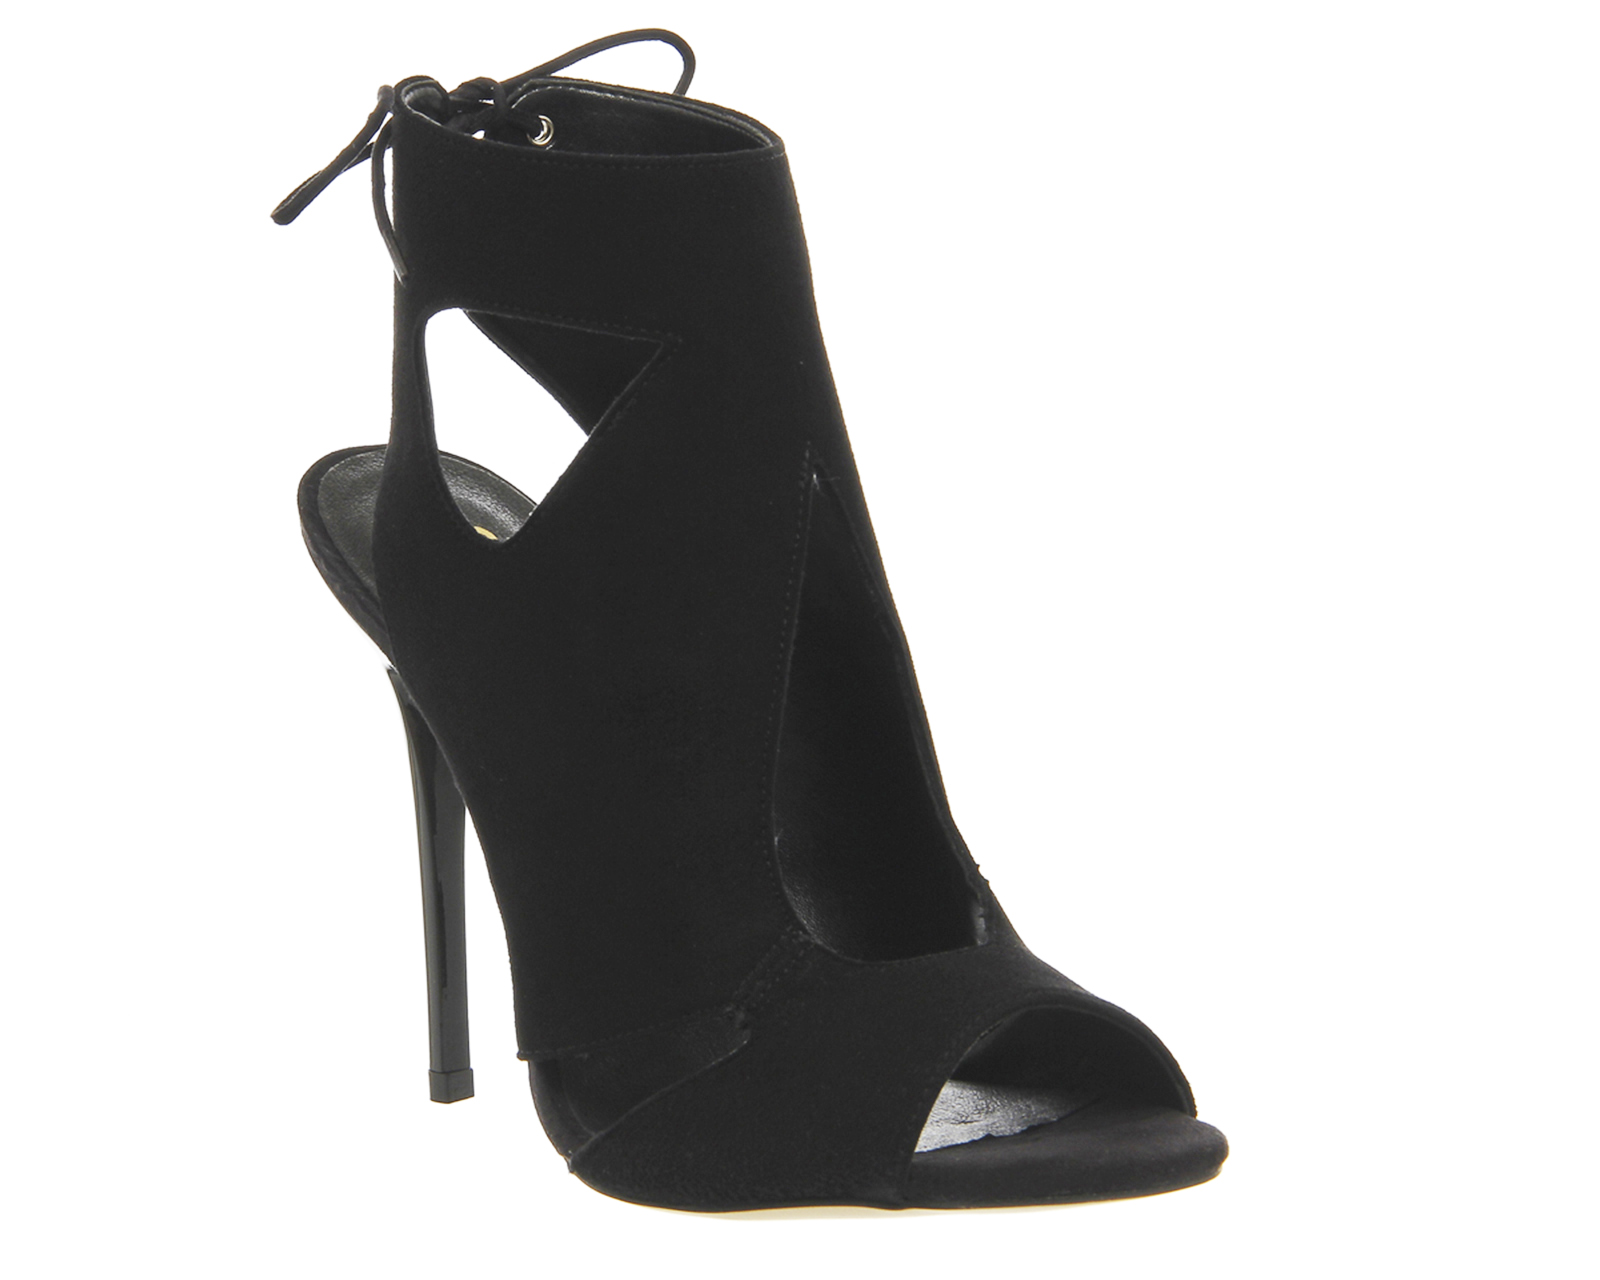 OFFICETally Cut Out Shoe BootsBlack Suede